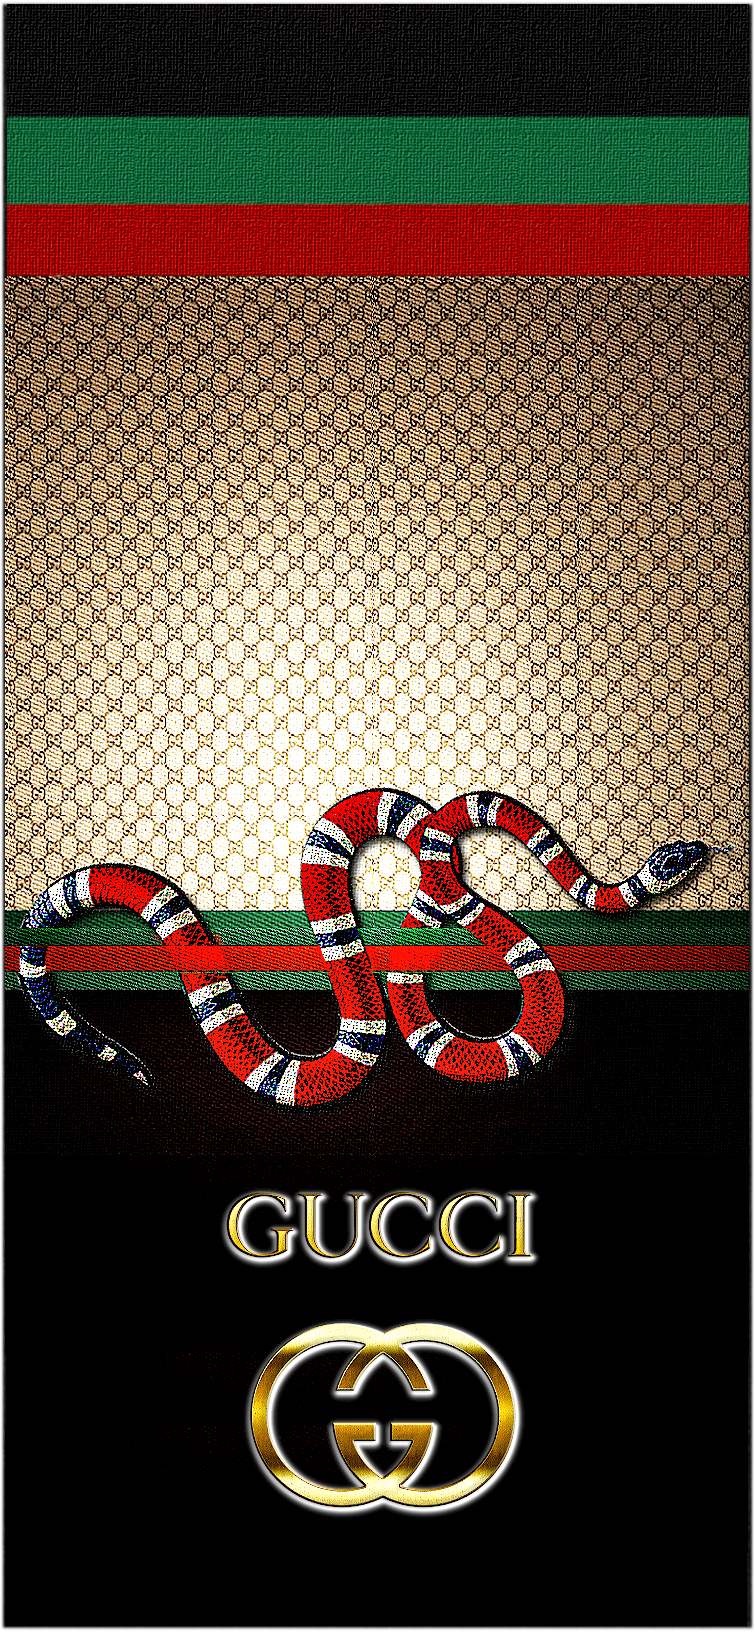 Gucci Slithering Snake iPhone Wallpaper